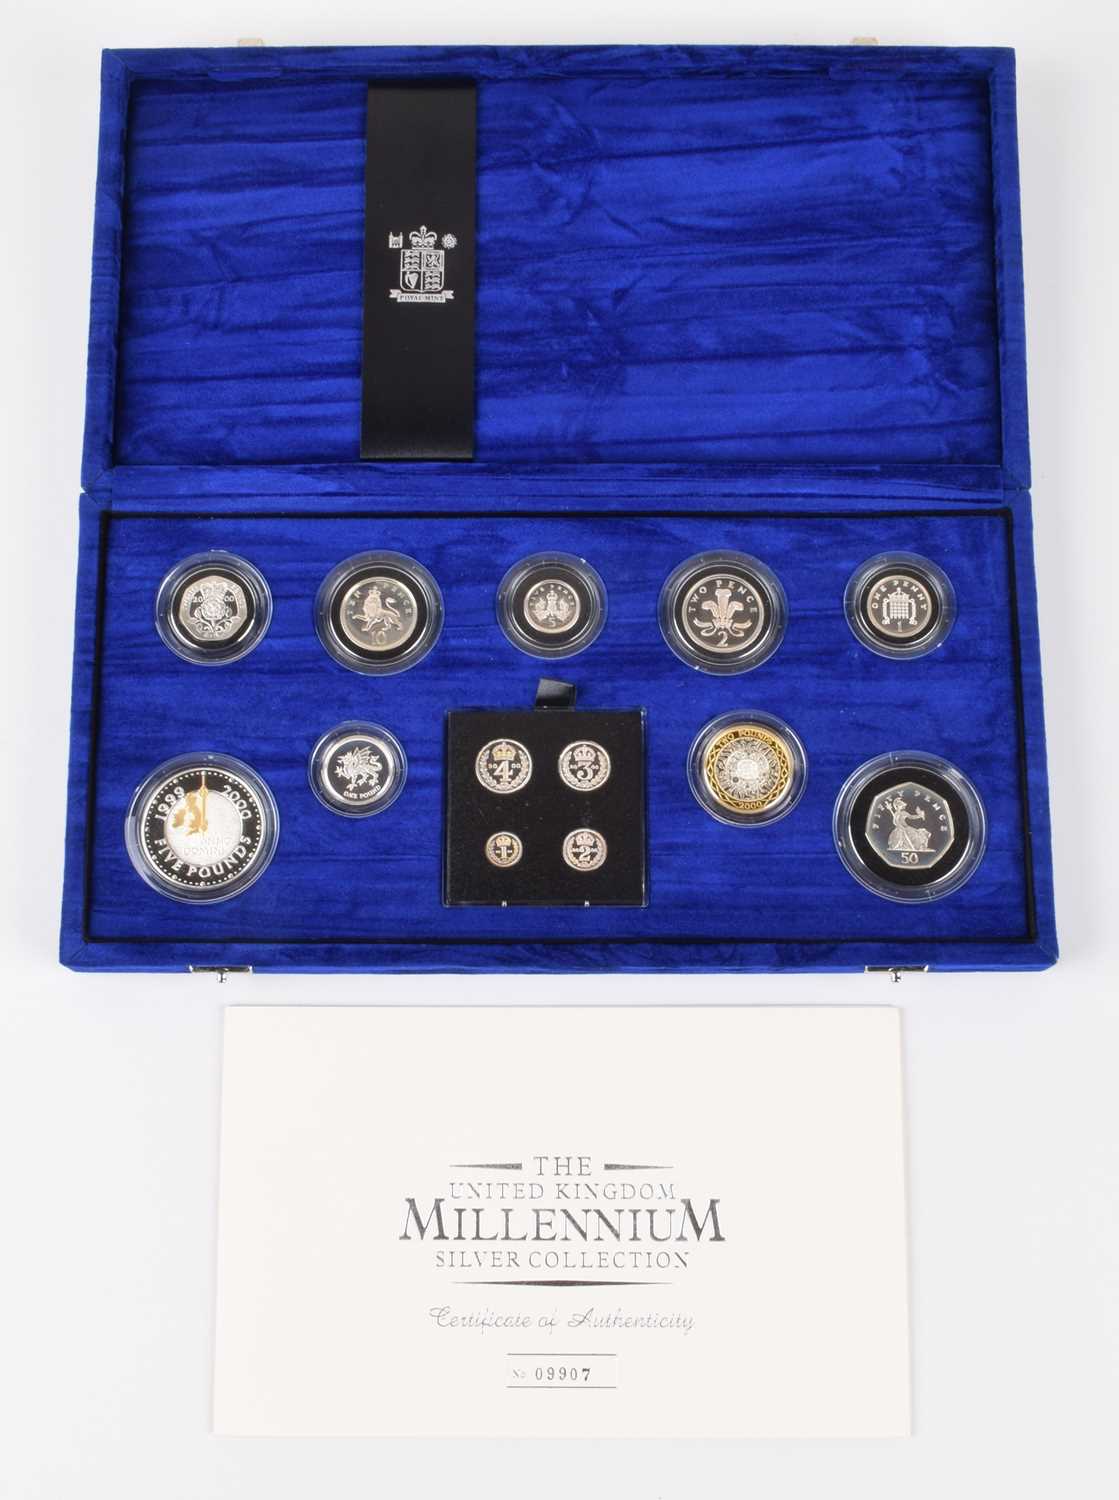 Lot 32 - The Royal Mint United Kingdom Millennium Silver Collection.